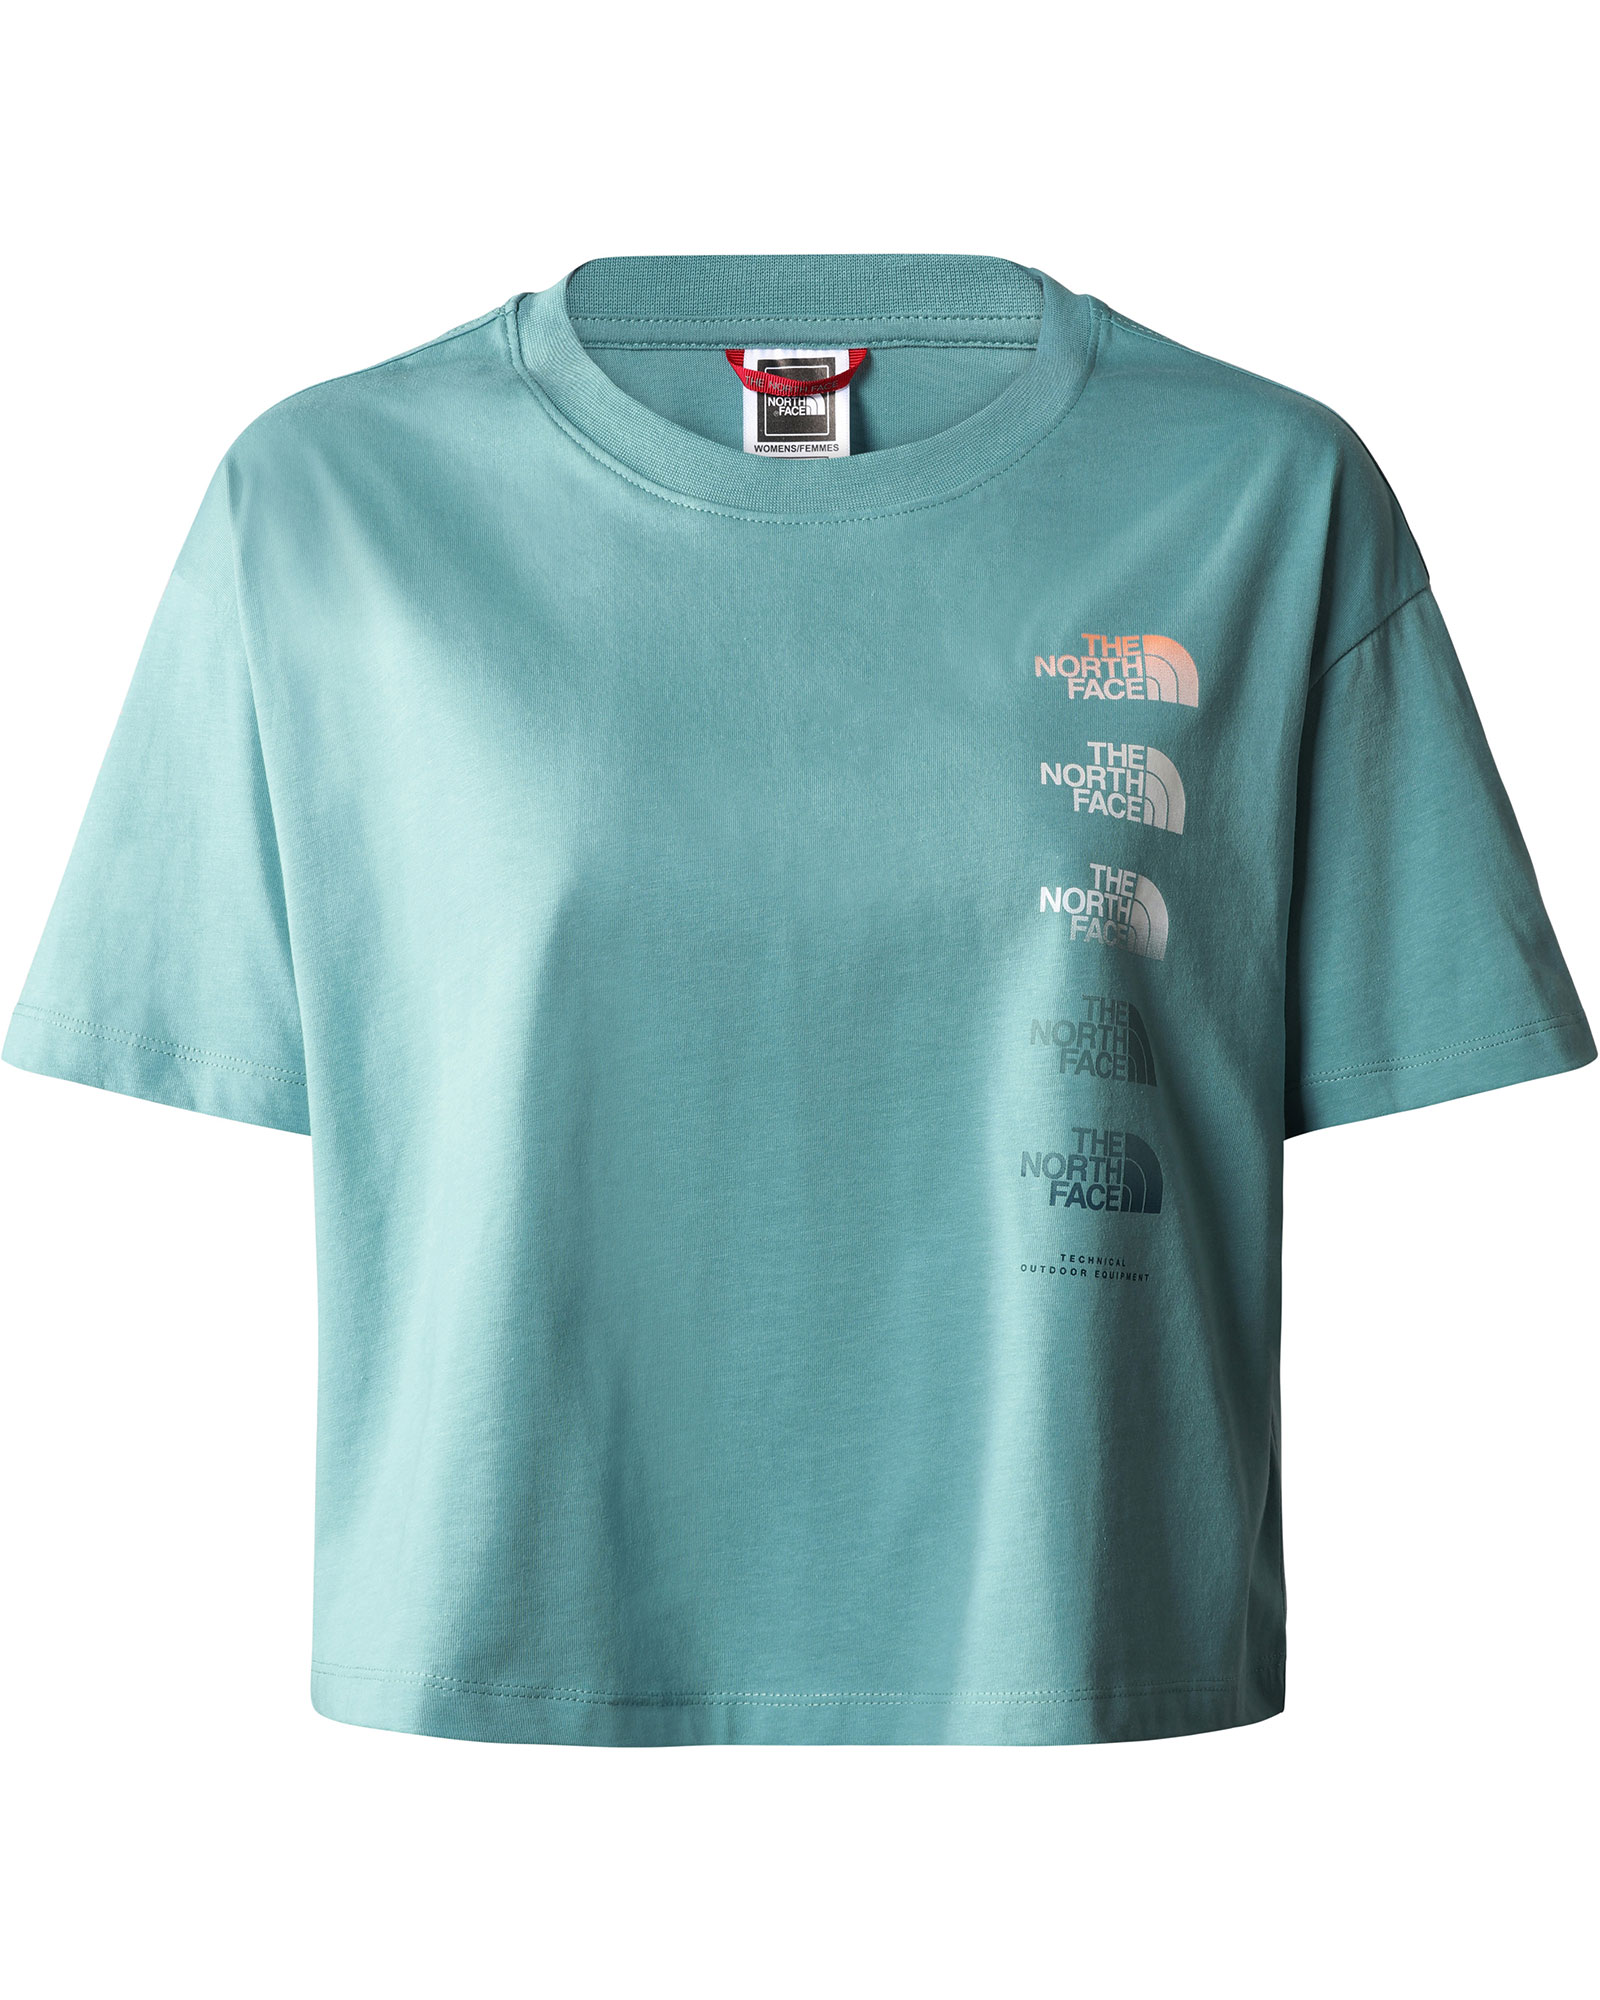 The North Face Women’s D2 Graphic Crop T Shirt - Reef Waters S